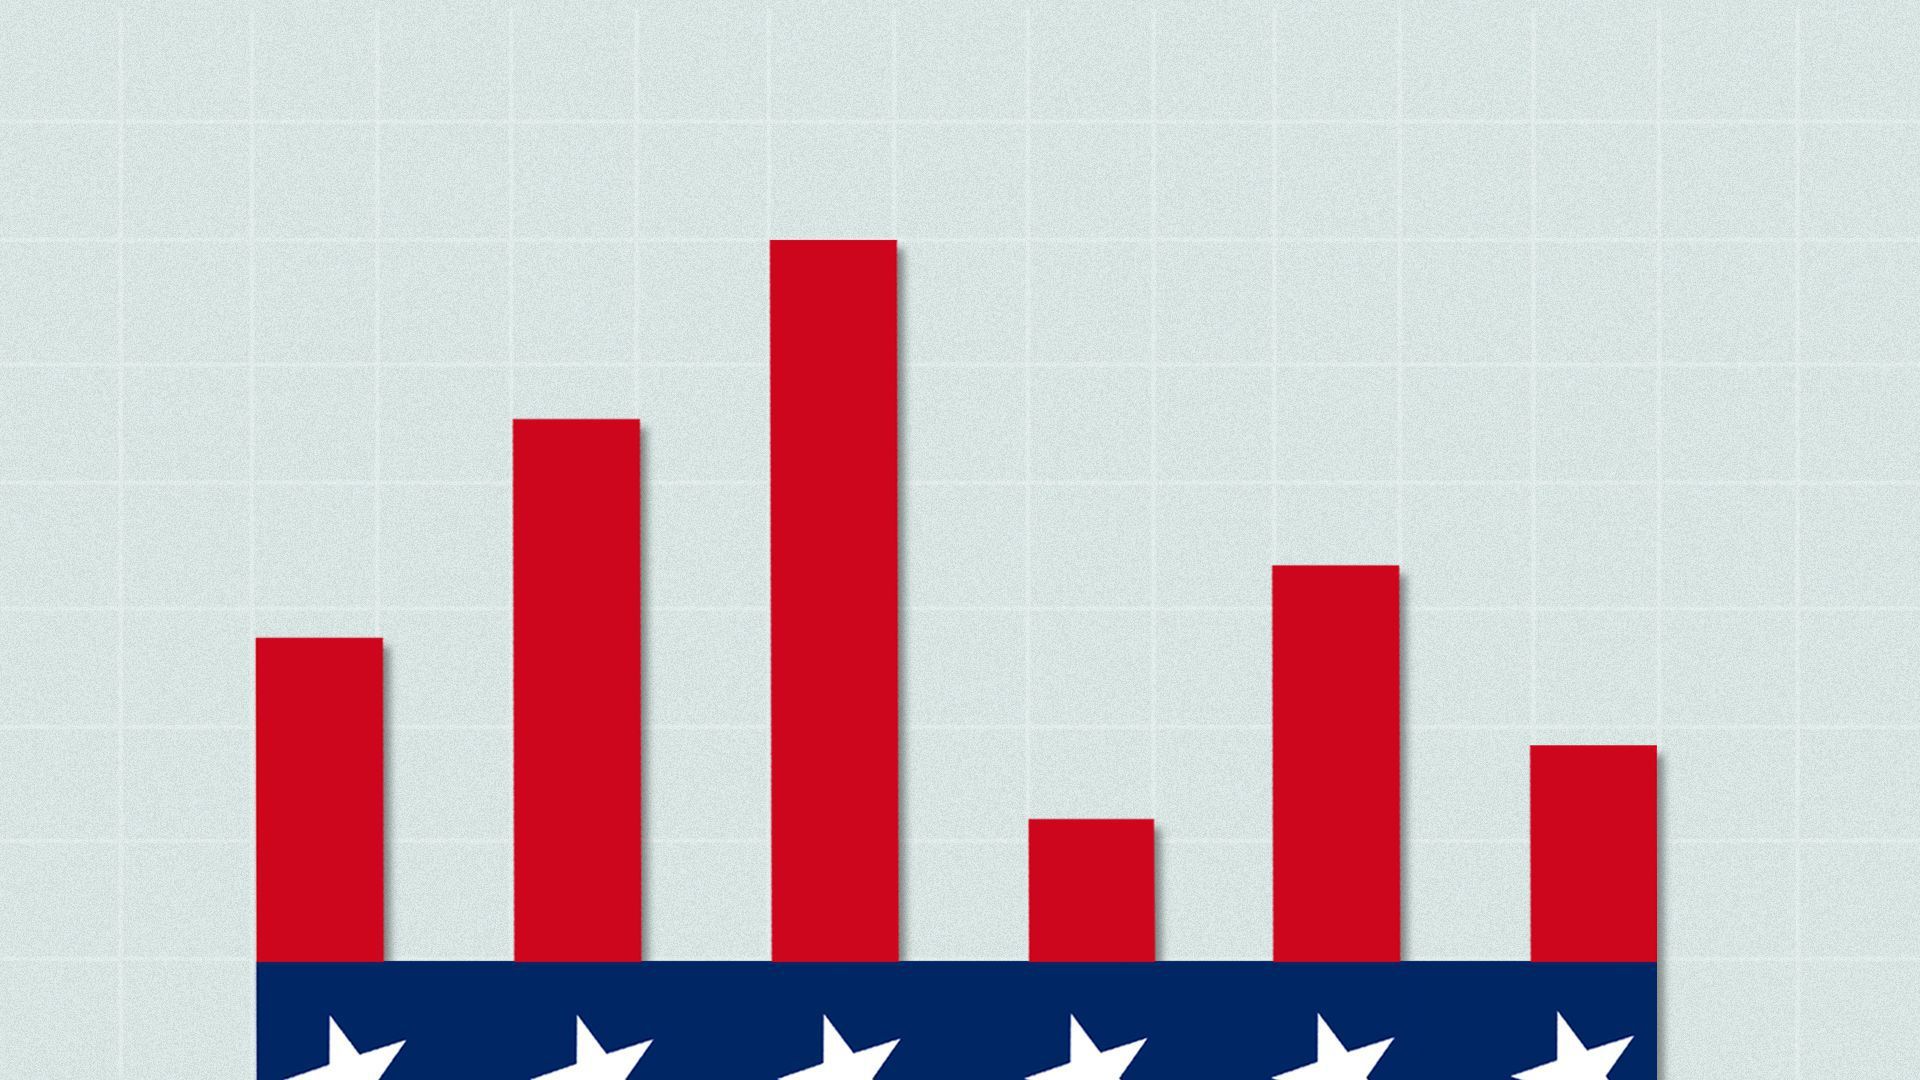 A bar graph in the style of the red, white and blue U.S. flag.